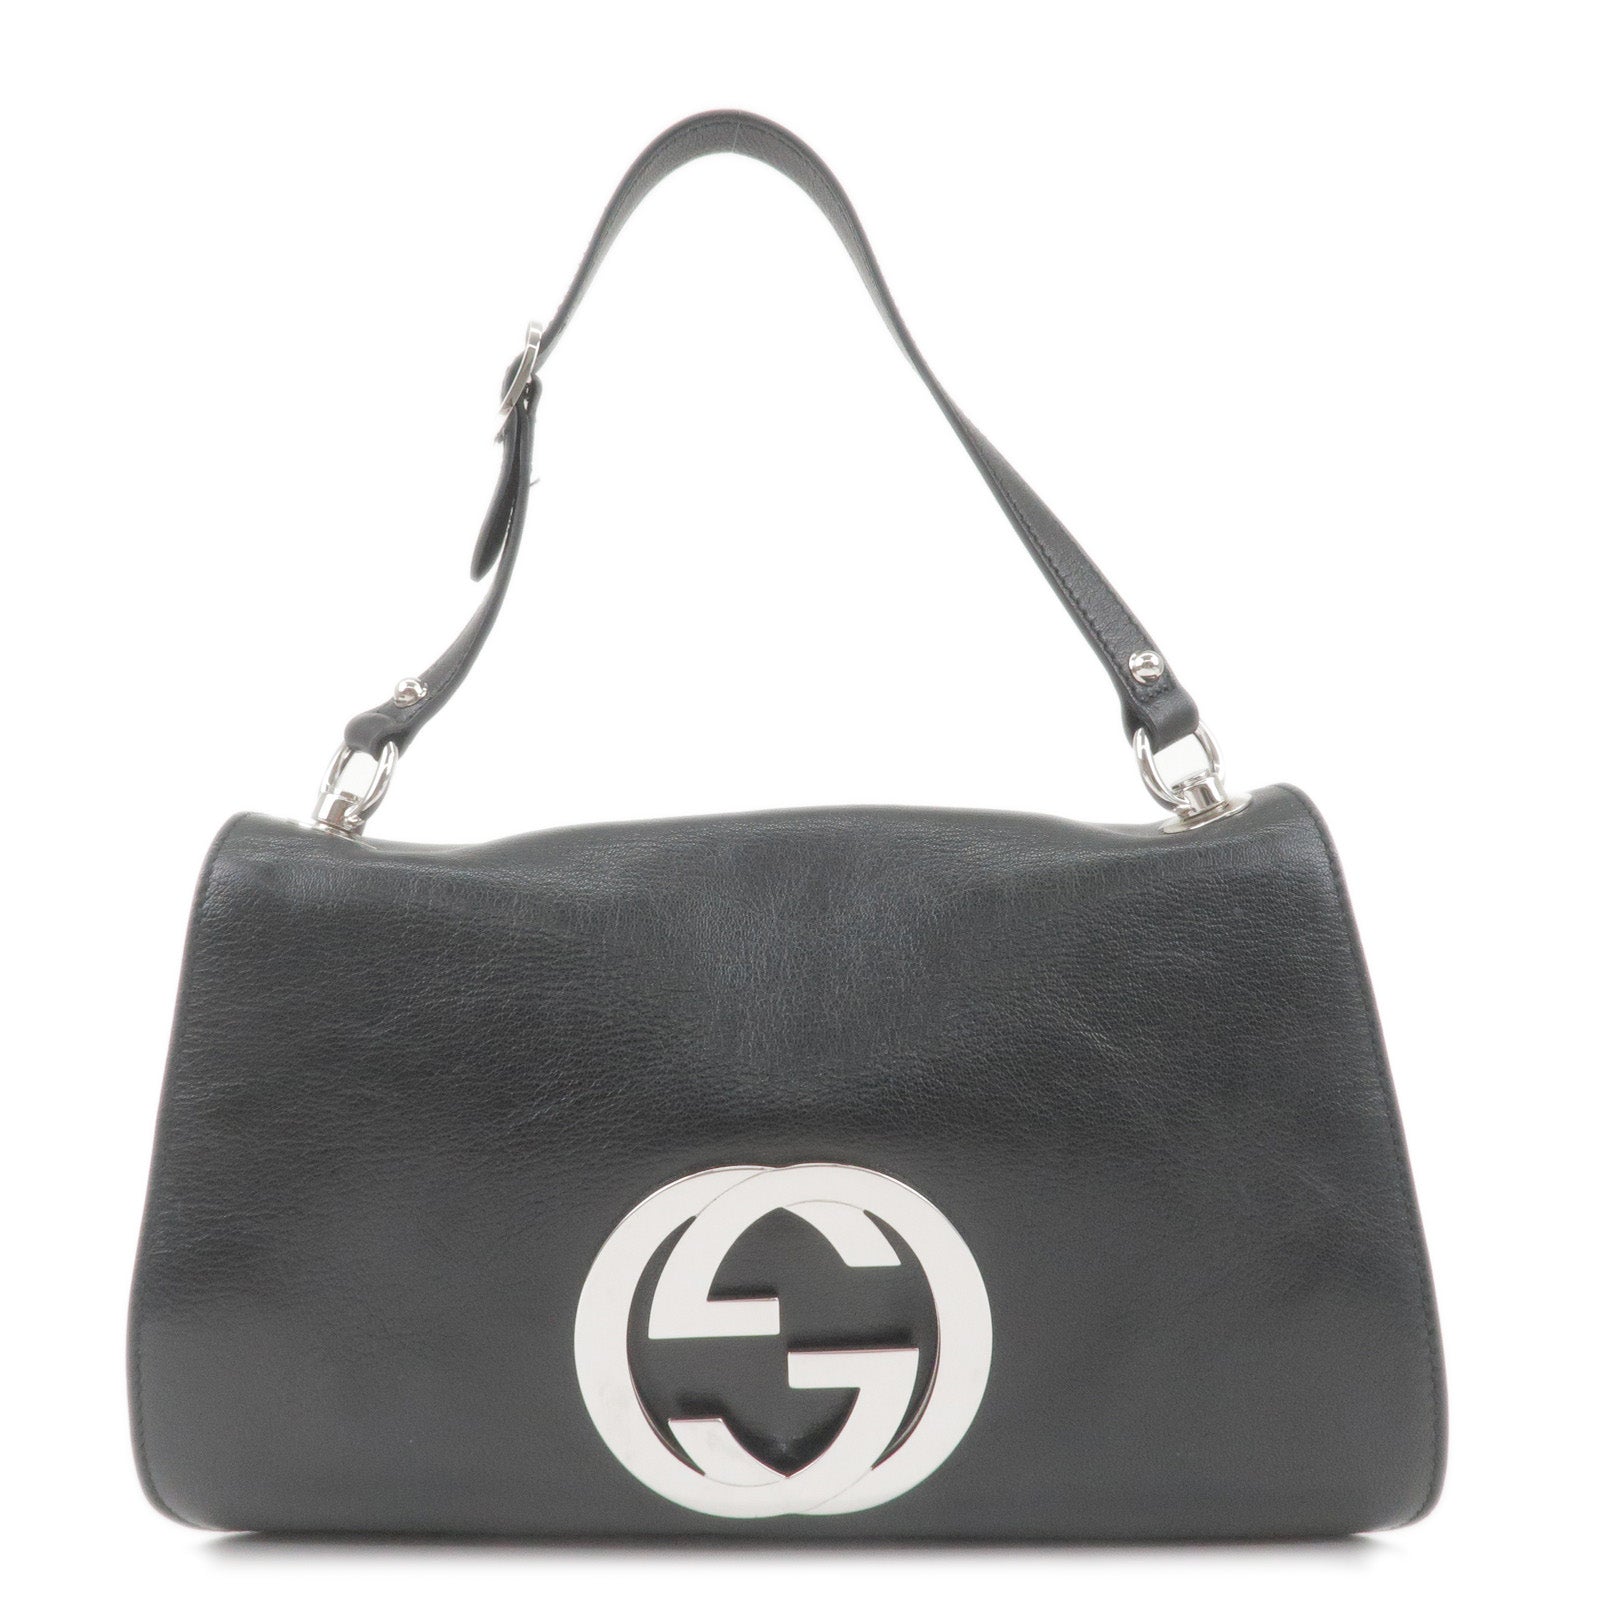 G - ep_vintage luxury Store - Black - 115746 – dct - gucci Square